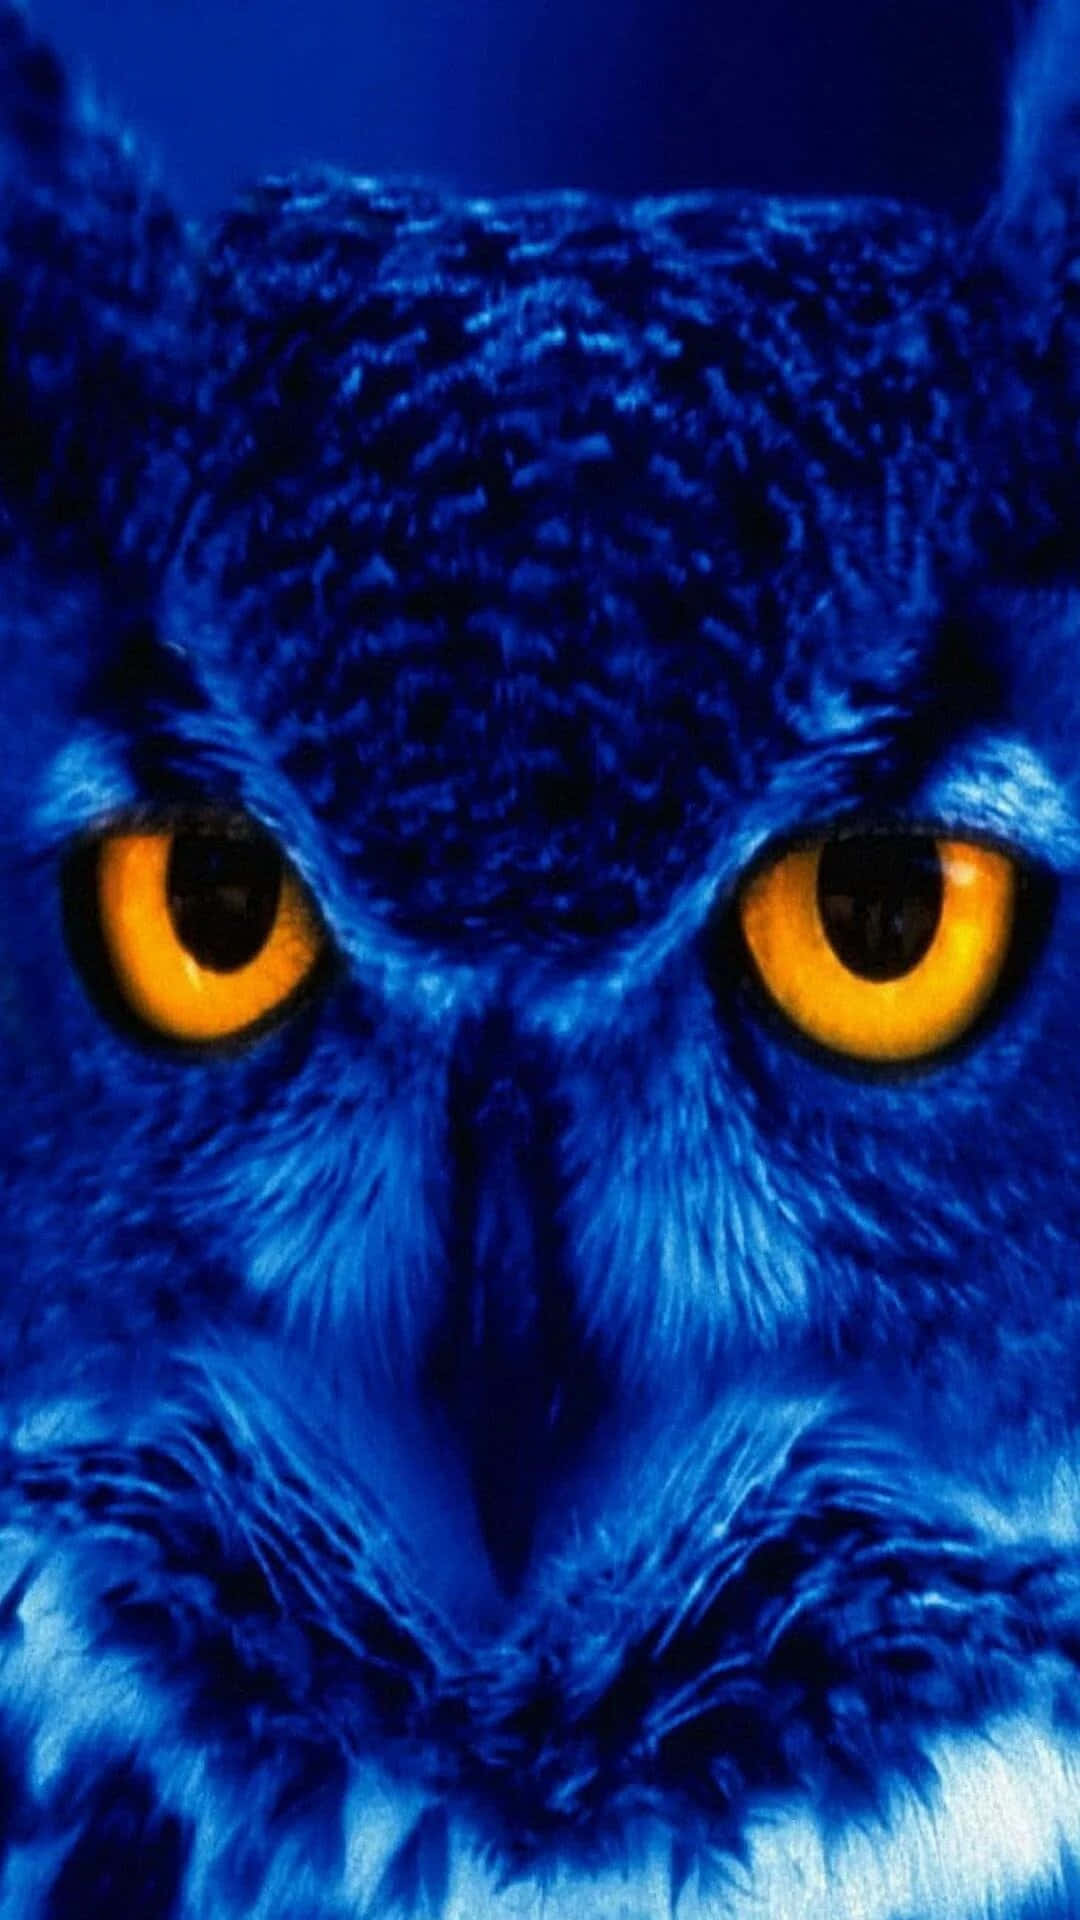 An Owl With Yellow Eyes Is Shown In Blue